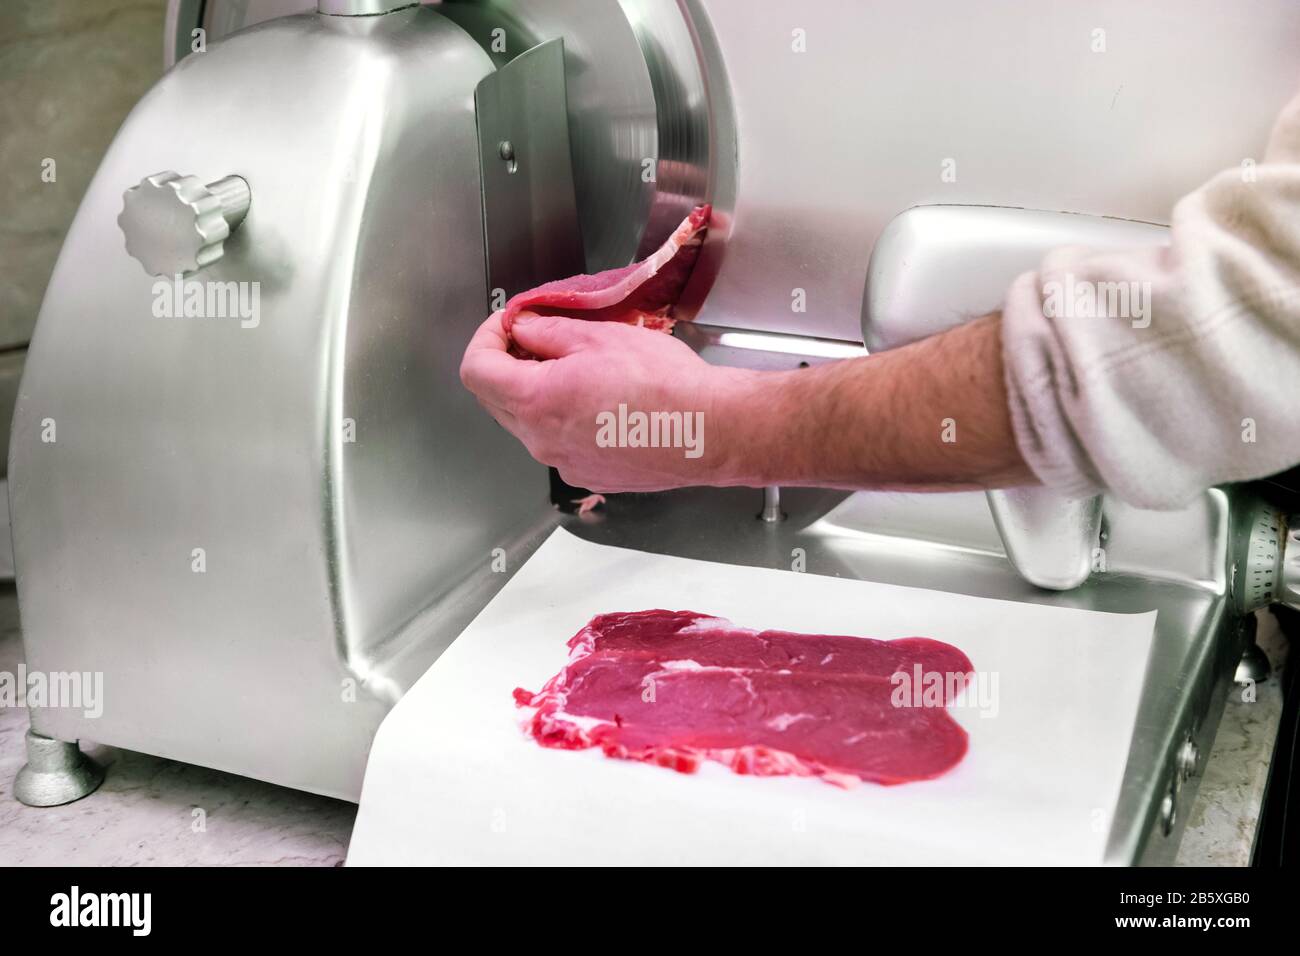 Butcher using a circular blade to slice raw beef steaks laying them neatly on paper below in a close up on his hands and the machine Stock Photo